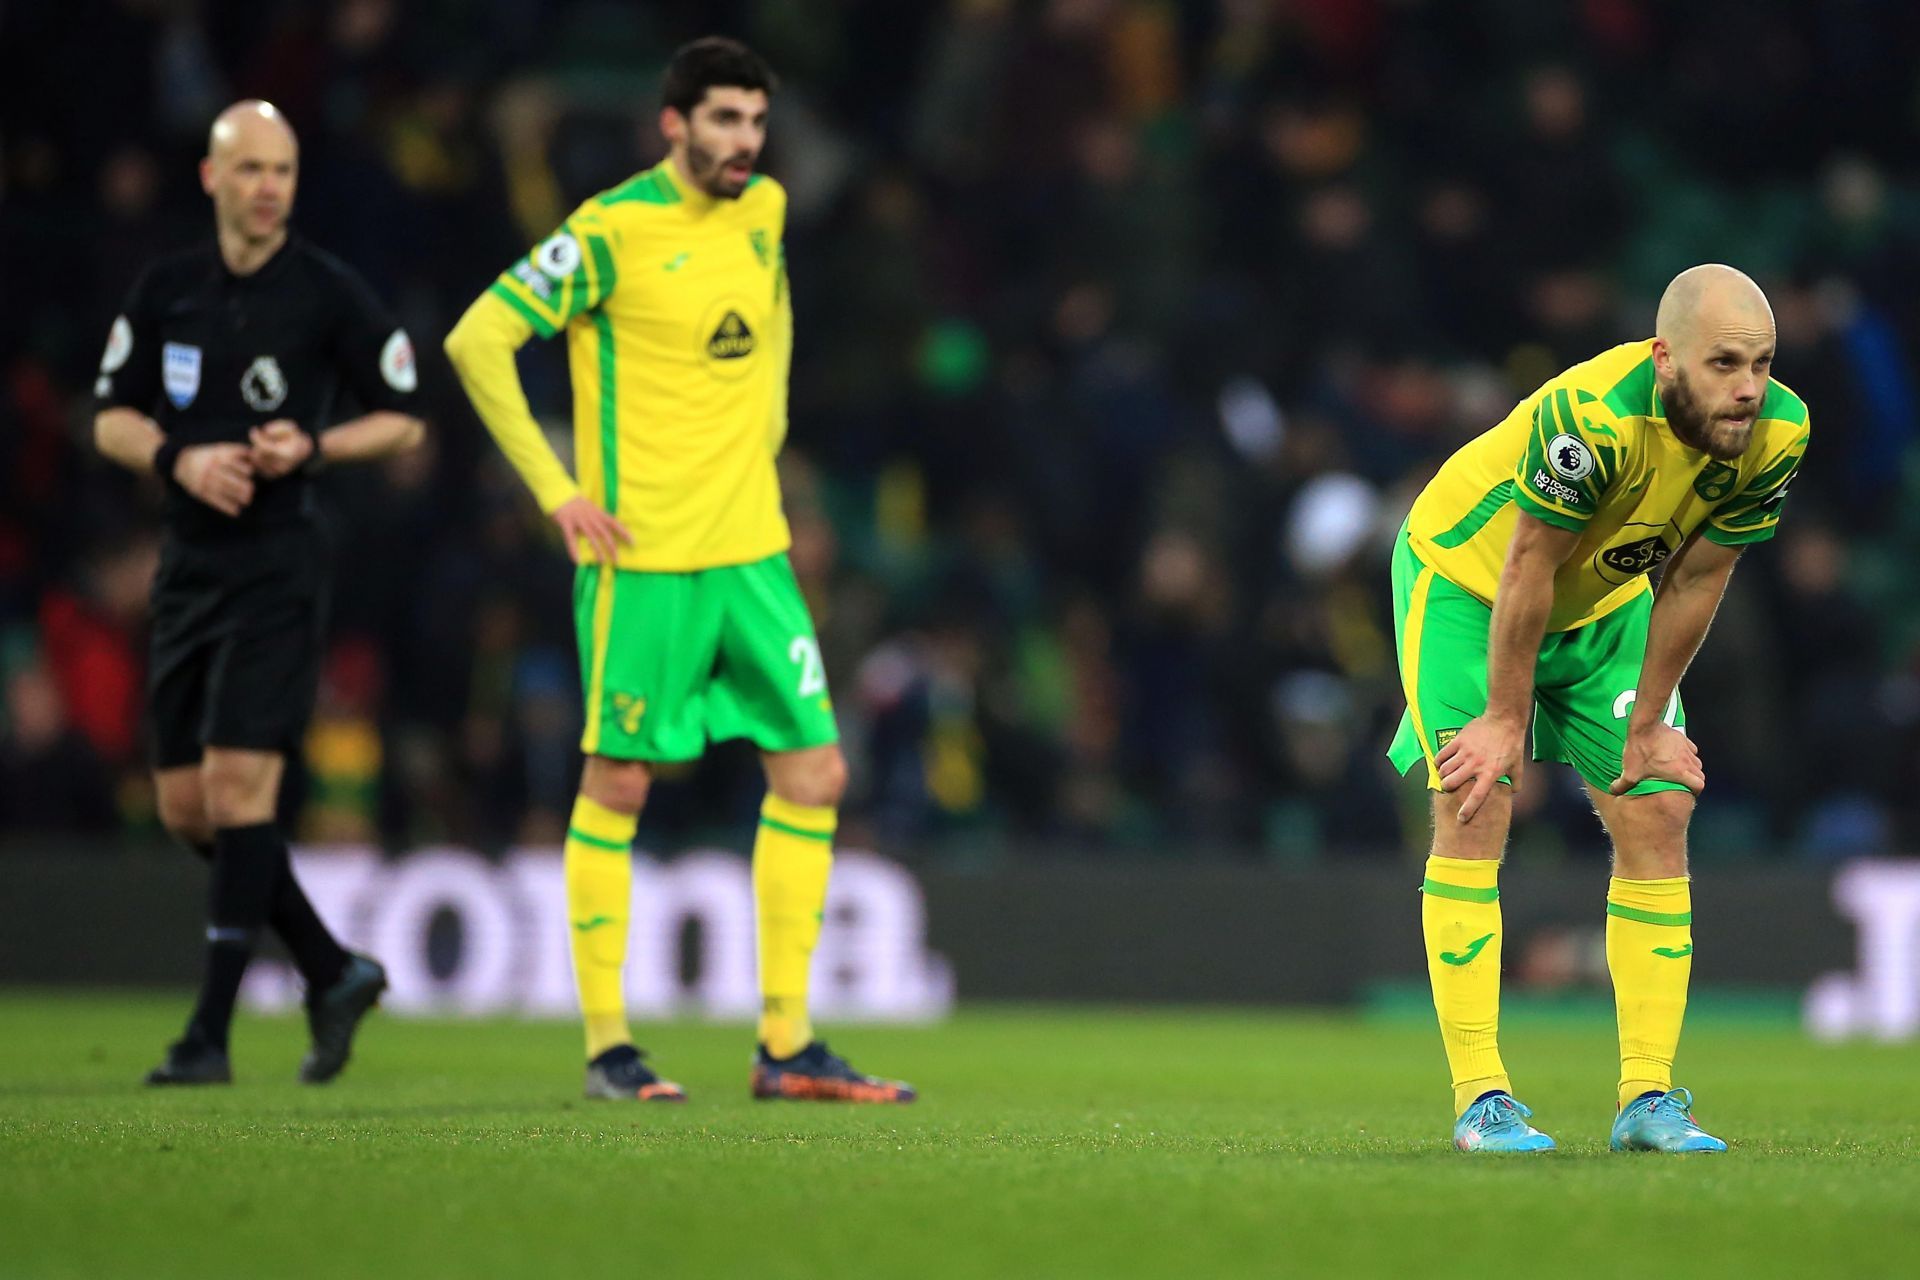 Norwich have a tendency to do well in the lower division but fail to perform in the Premier League